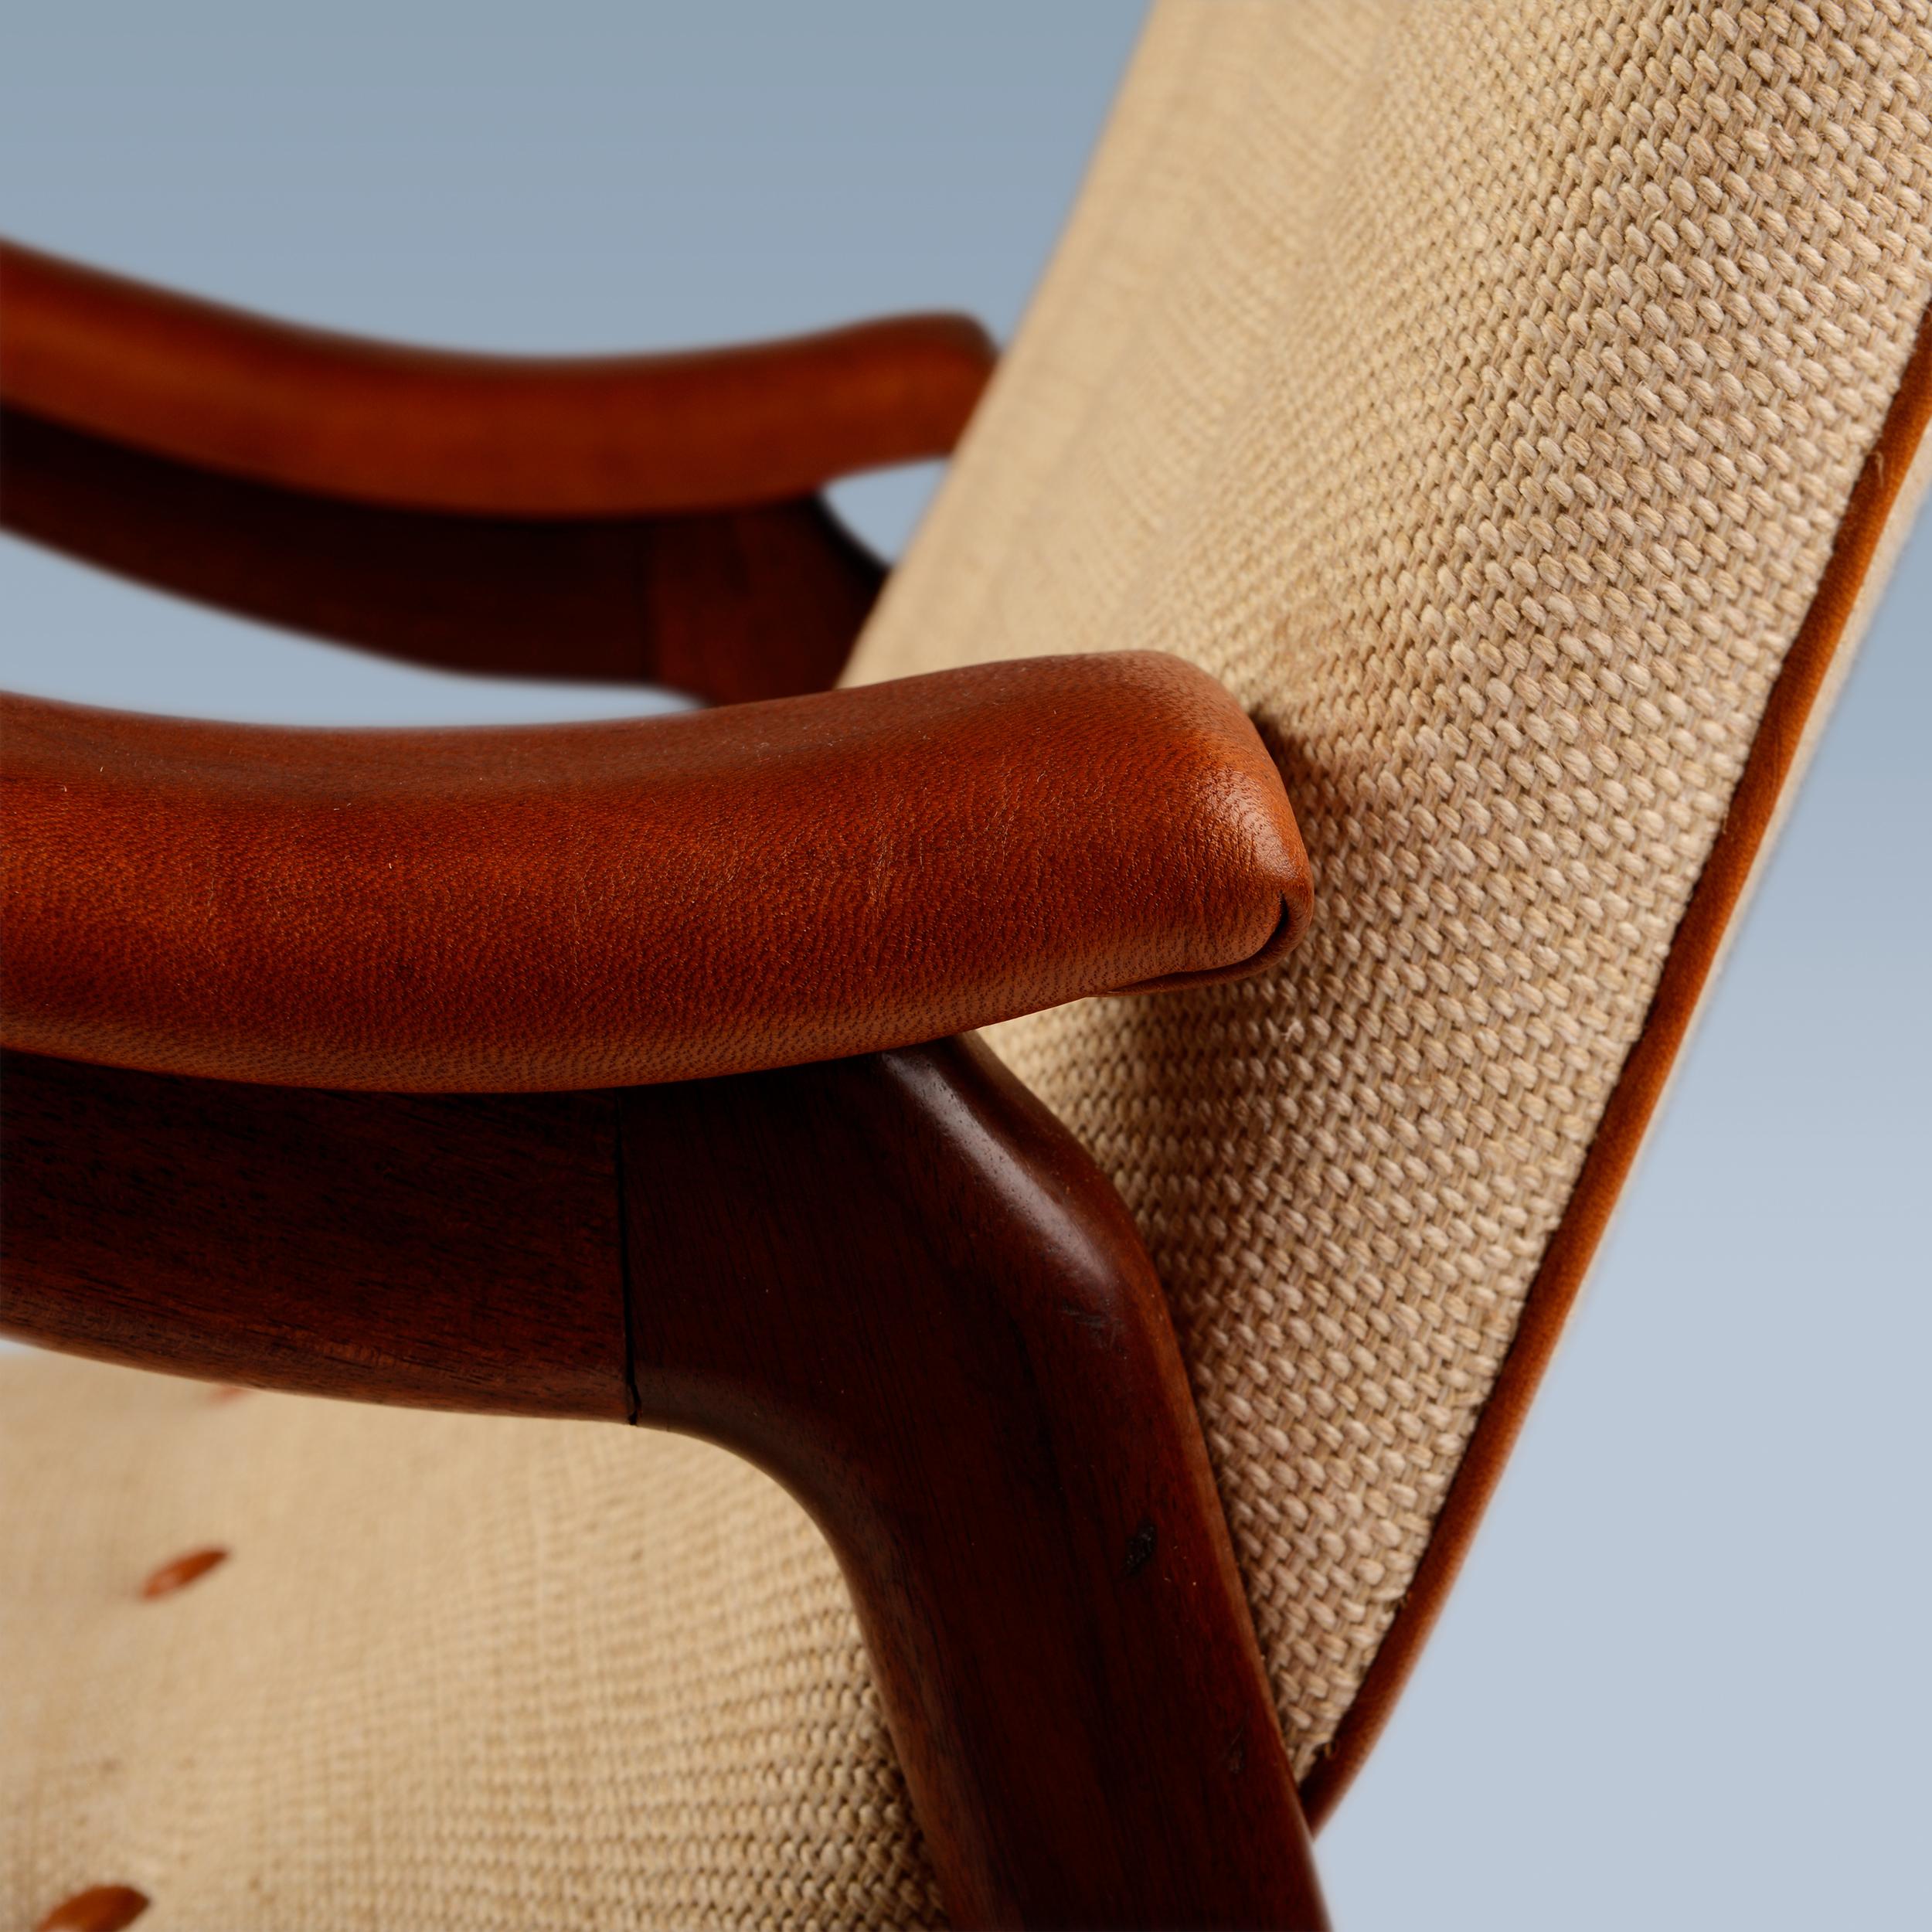 Teak chair with curvy seat upholstered with light fabric and leather details For Sale 5